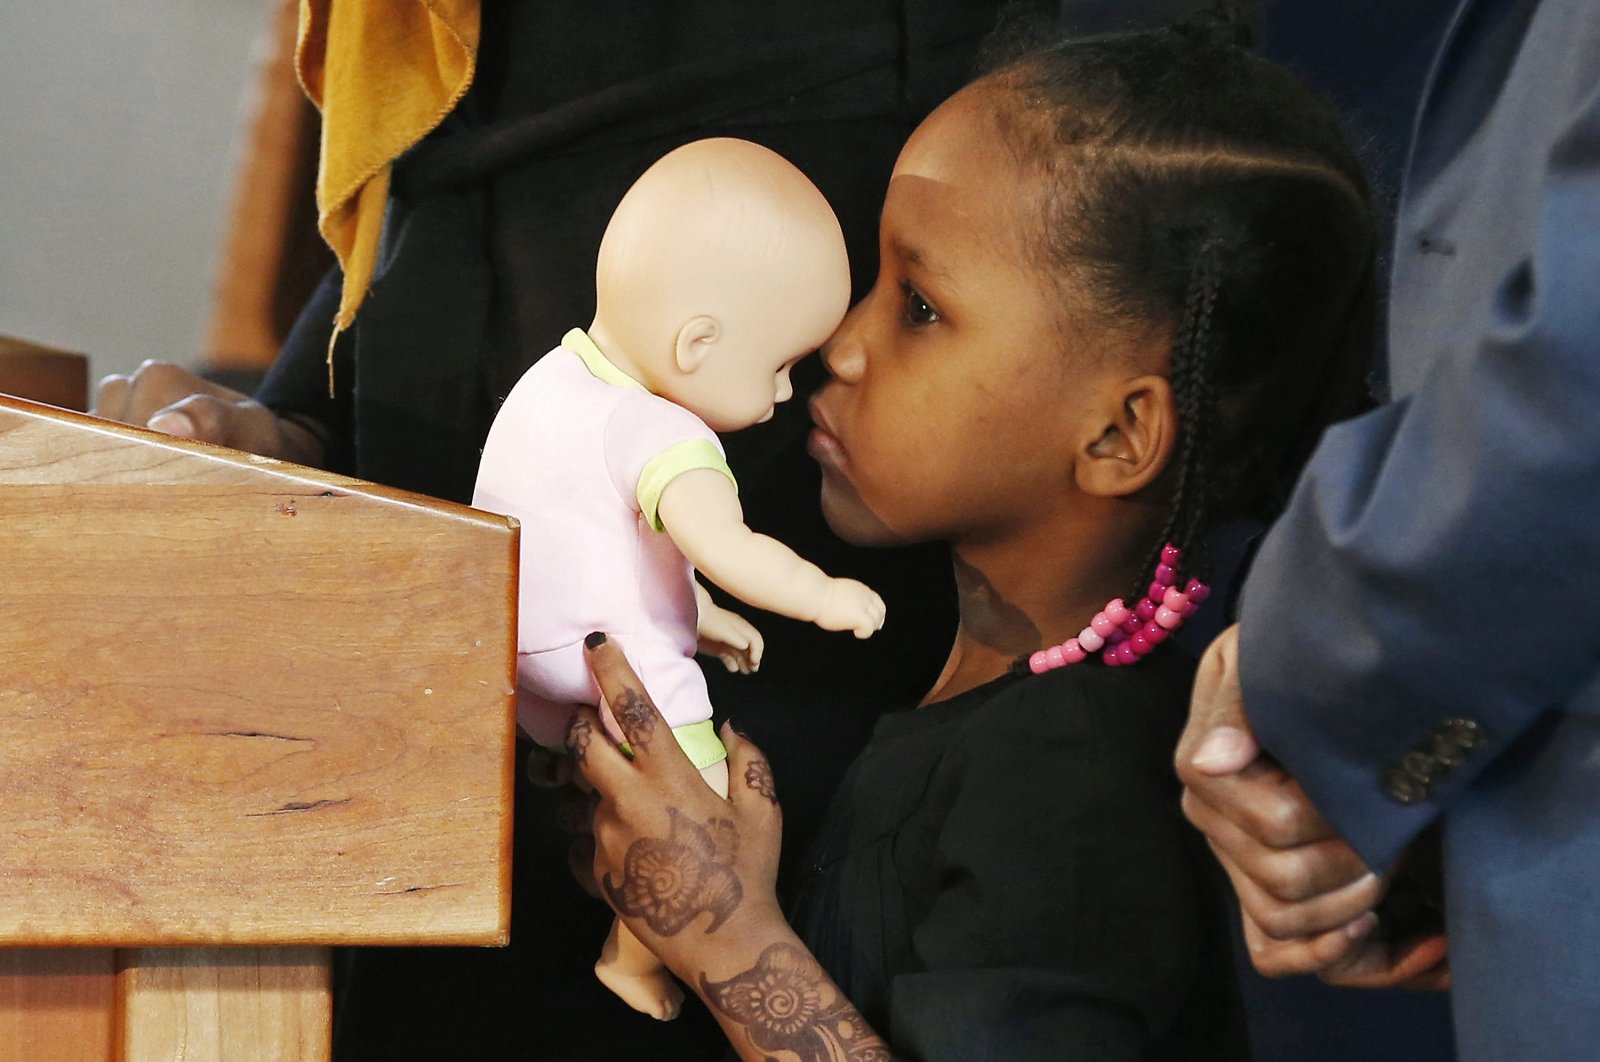 Four-year-old Somali refugee Mushkaad Abdi holds her doll as her mother, Samira Dahir, talks during a Minneapolis news conference one day after she was reunited with her family, Feb. 3, 2017. (AP Photo)